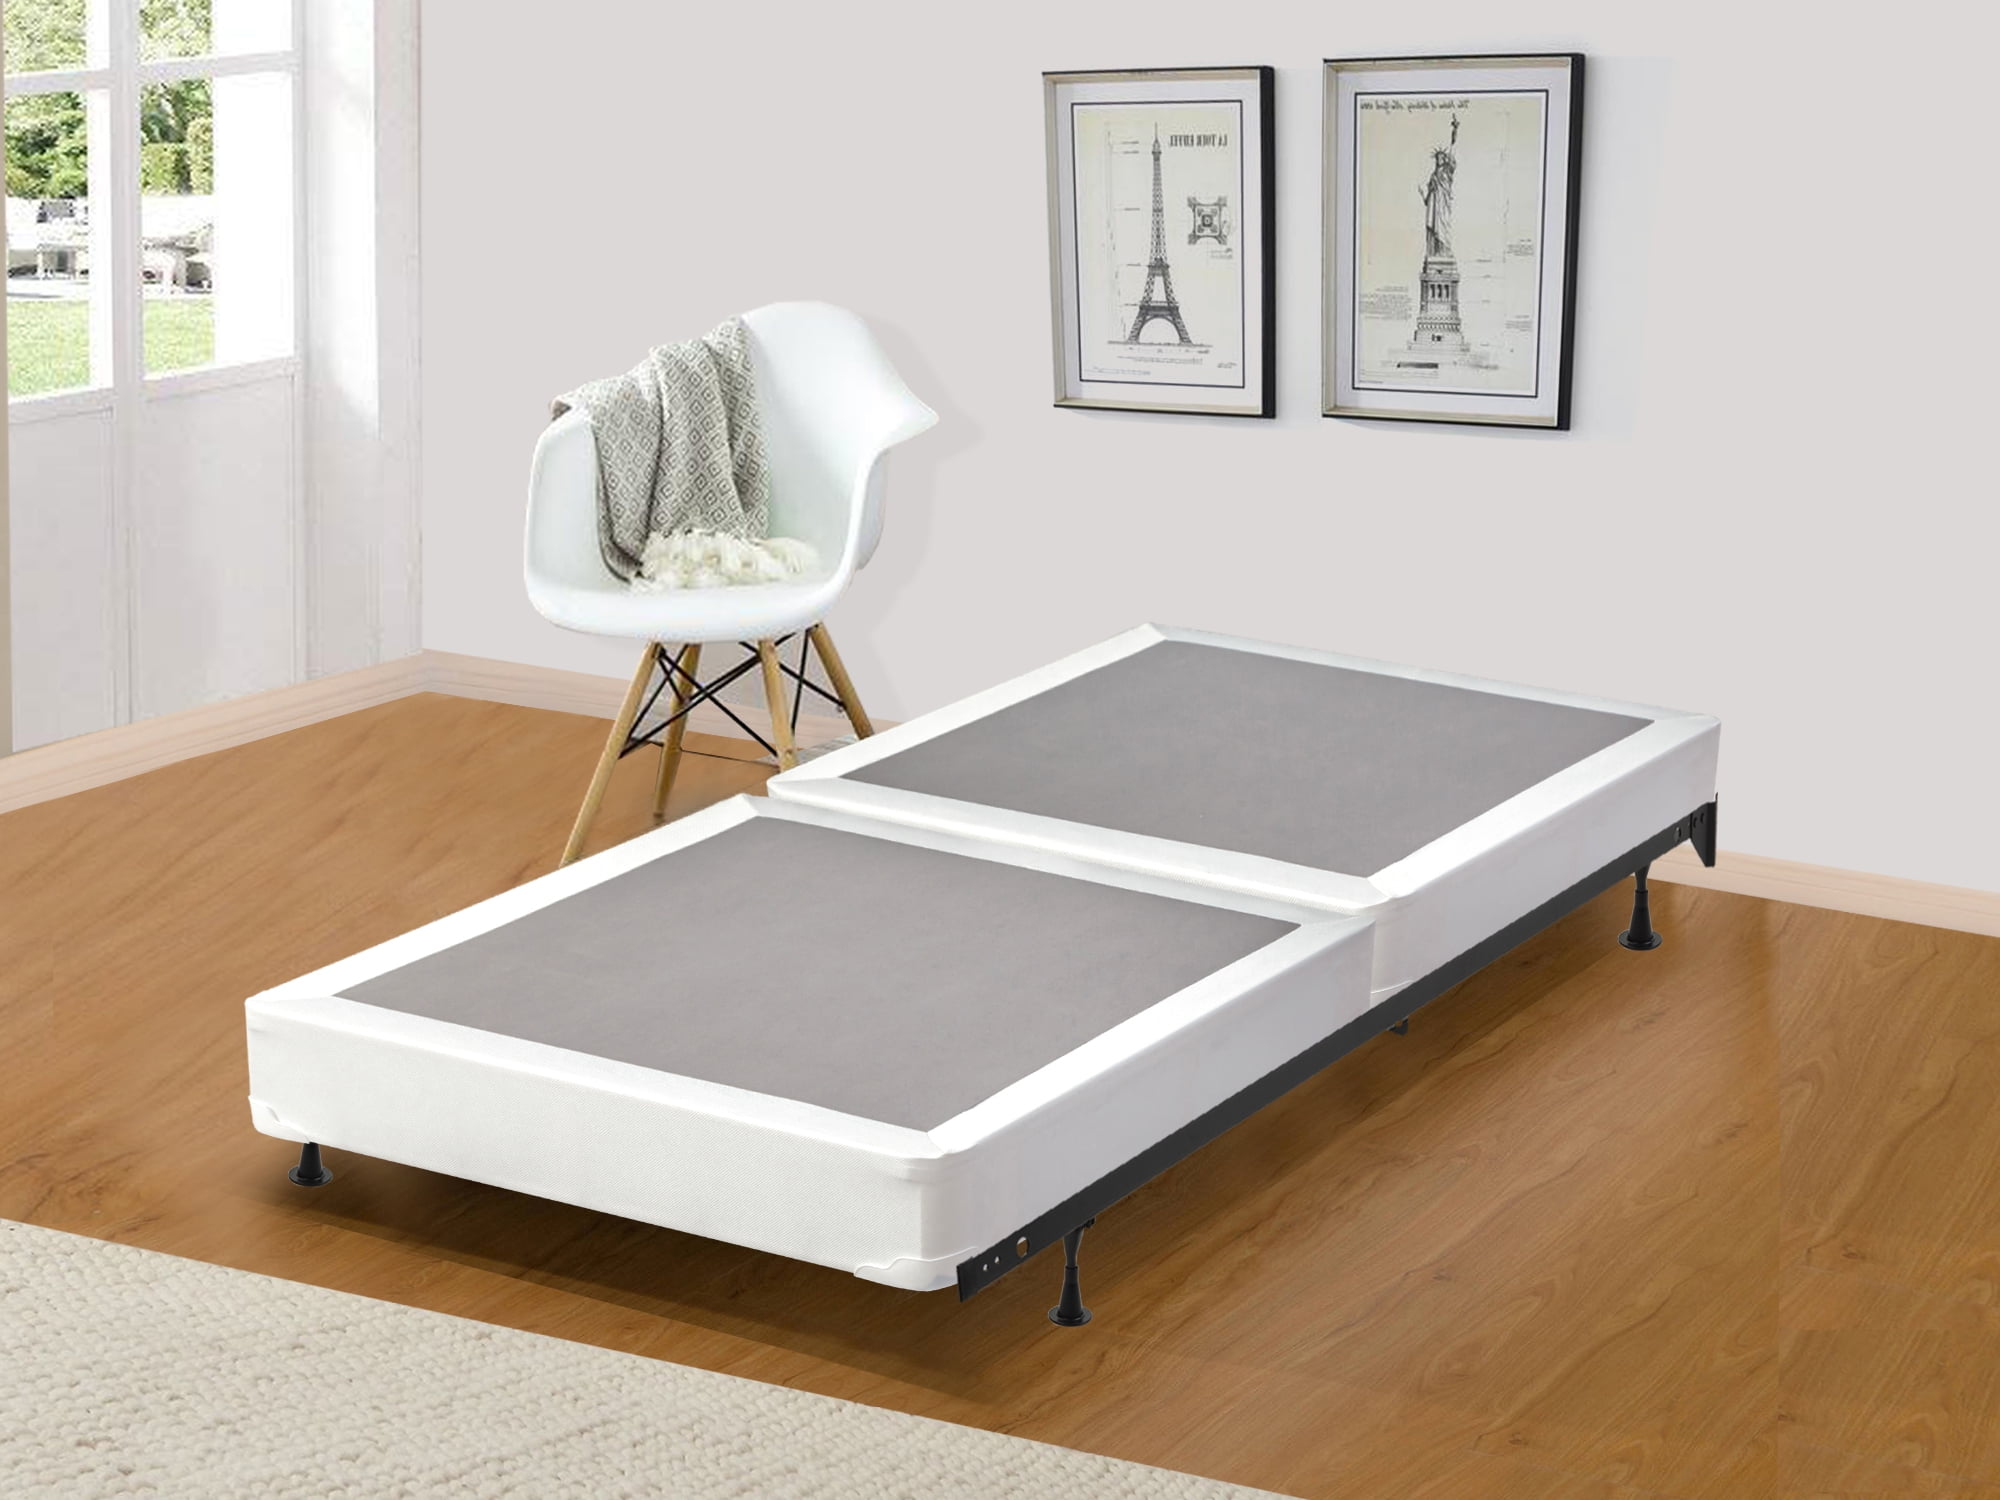 mattresses & box springs or bed frame